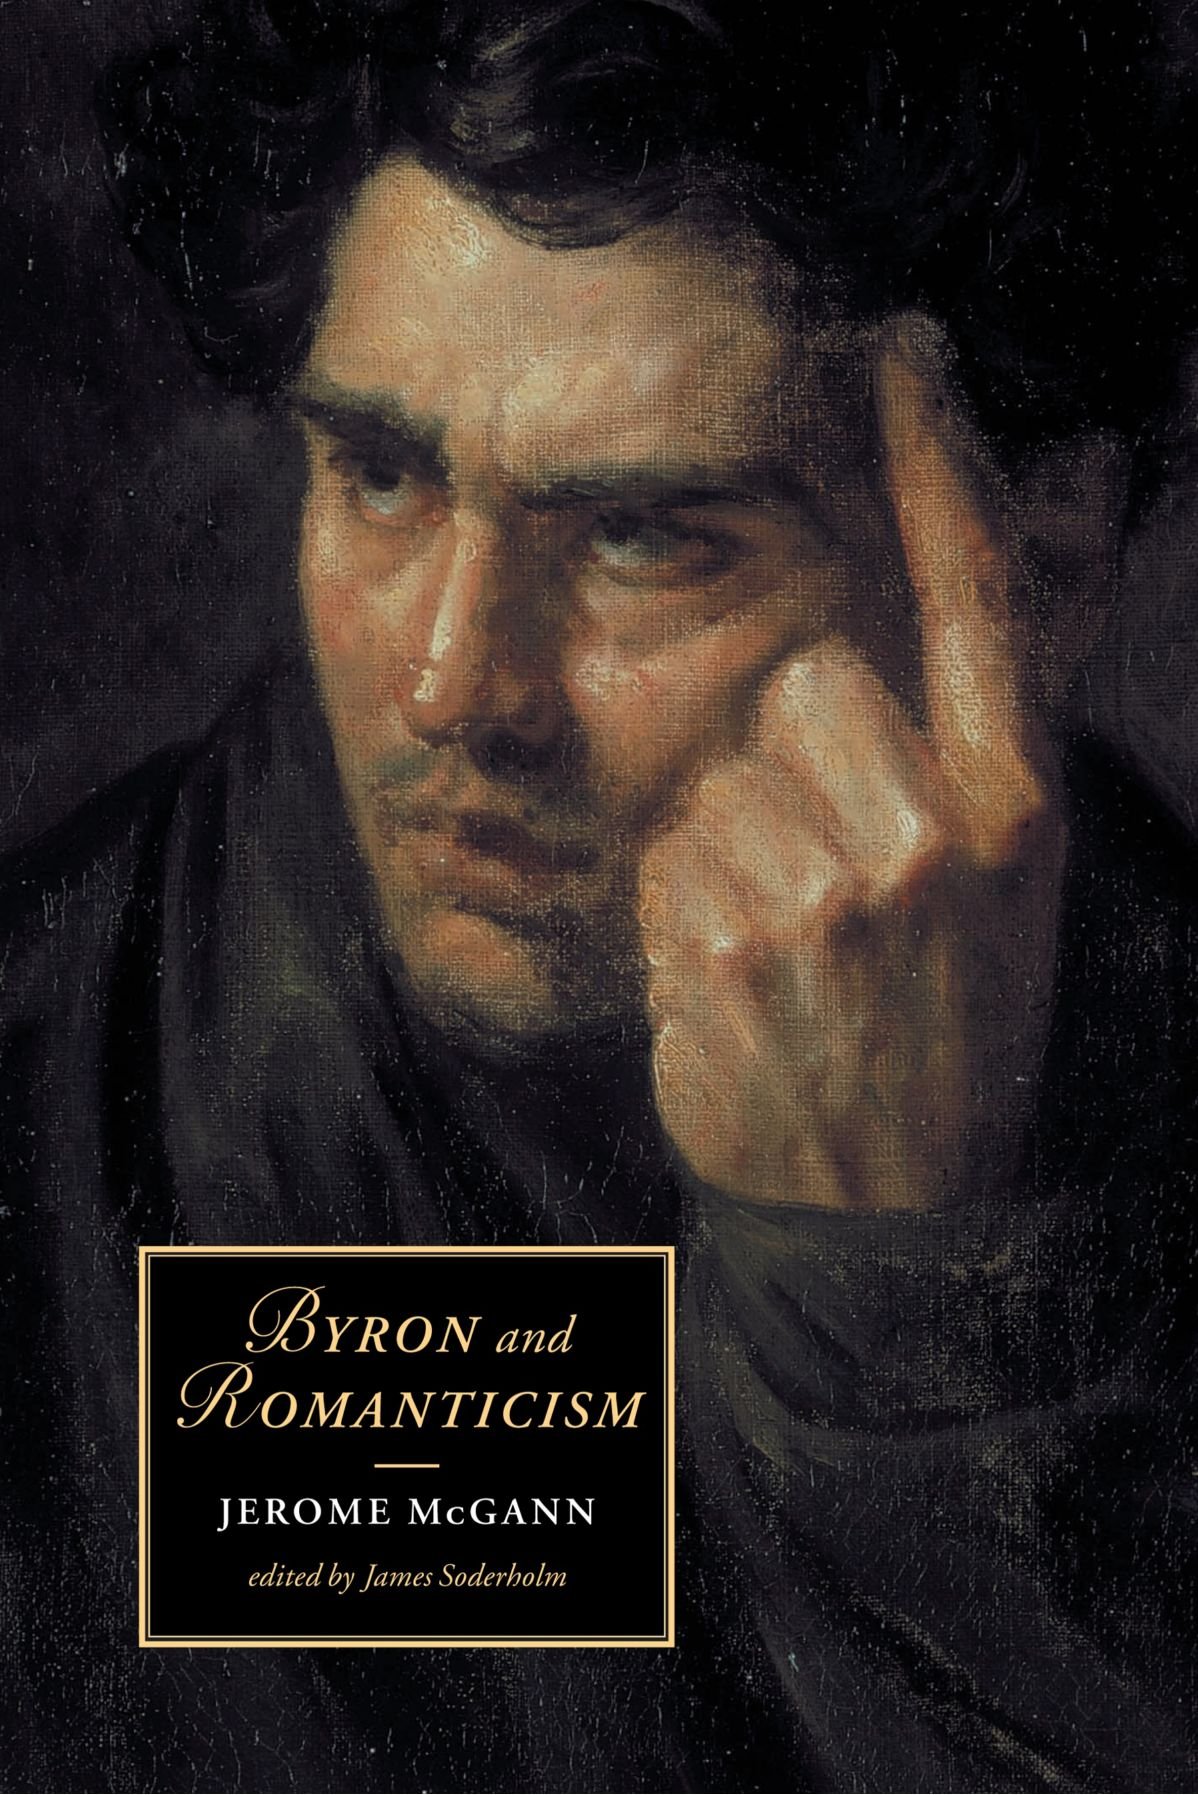 Byron and romanticism